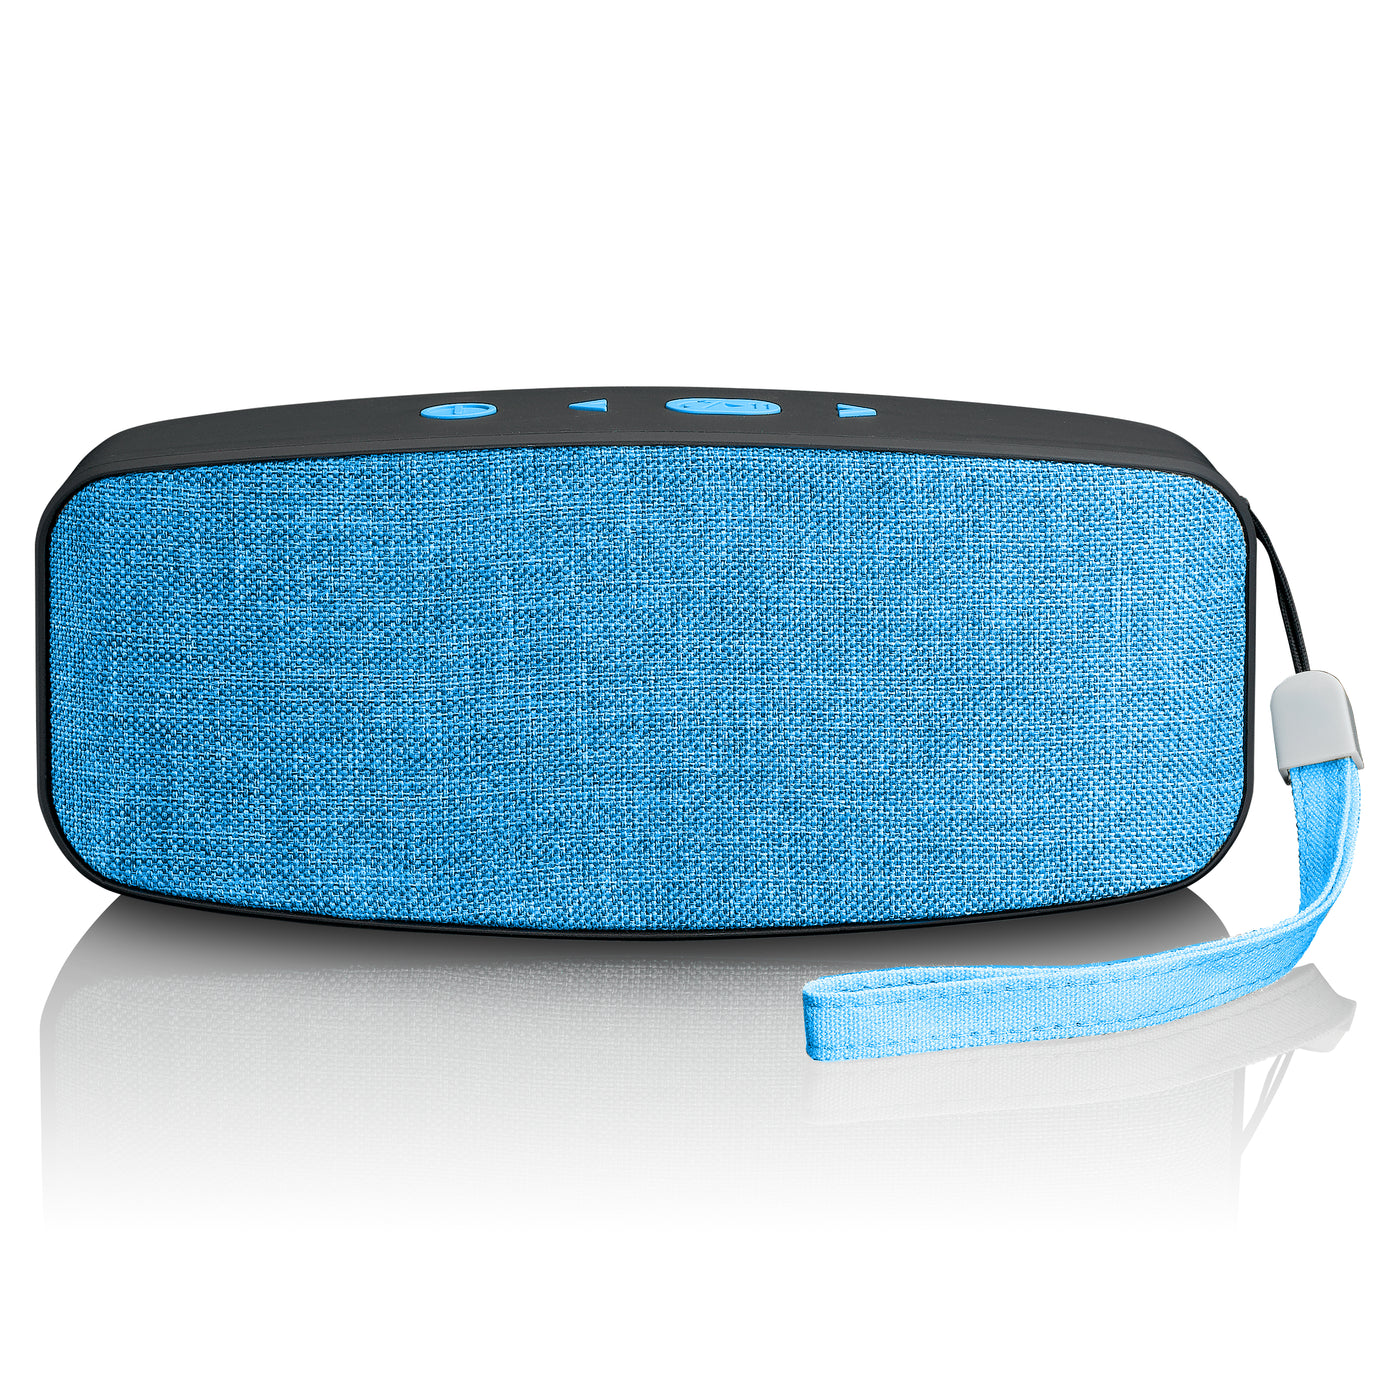 Lenco BT-130BU - Stereo Bluetooth speaker with 6w output power and carry strap - Blue